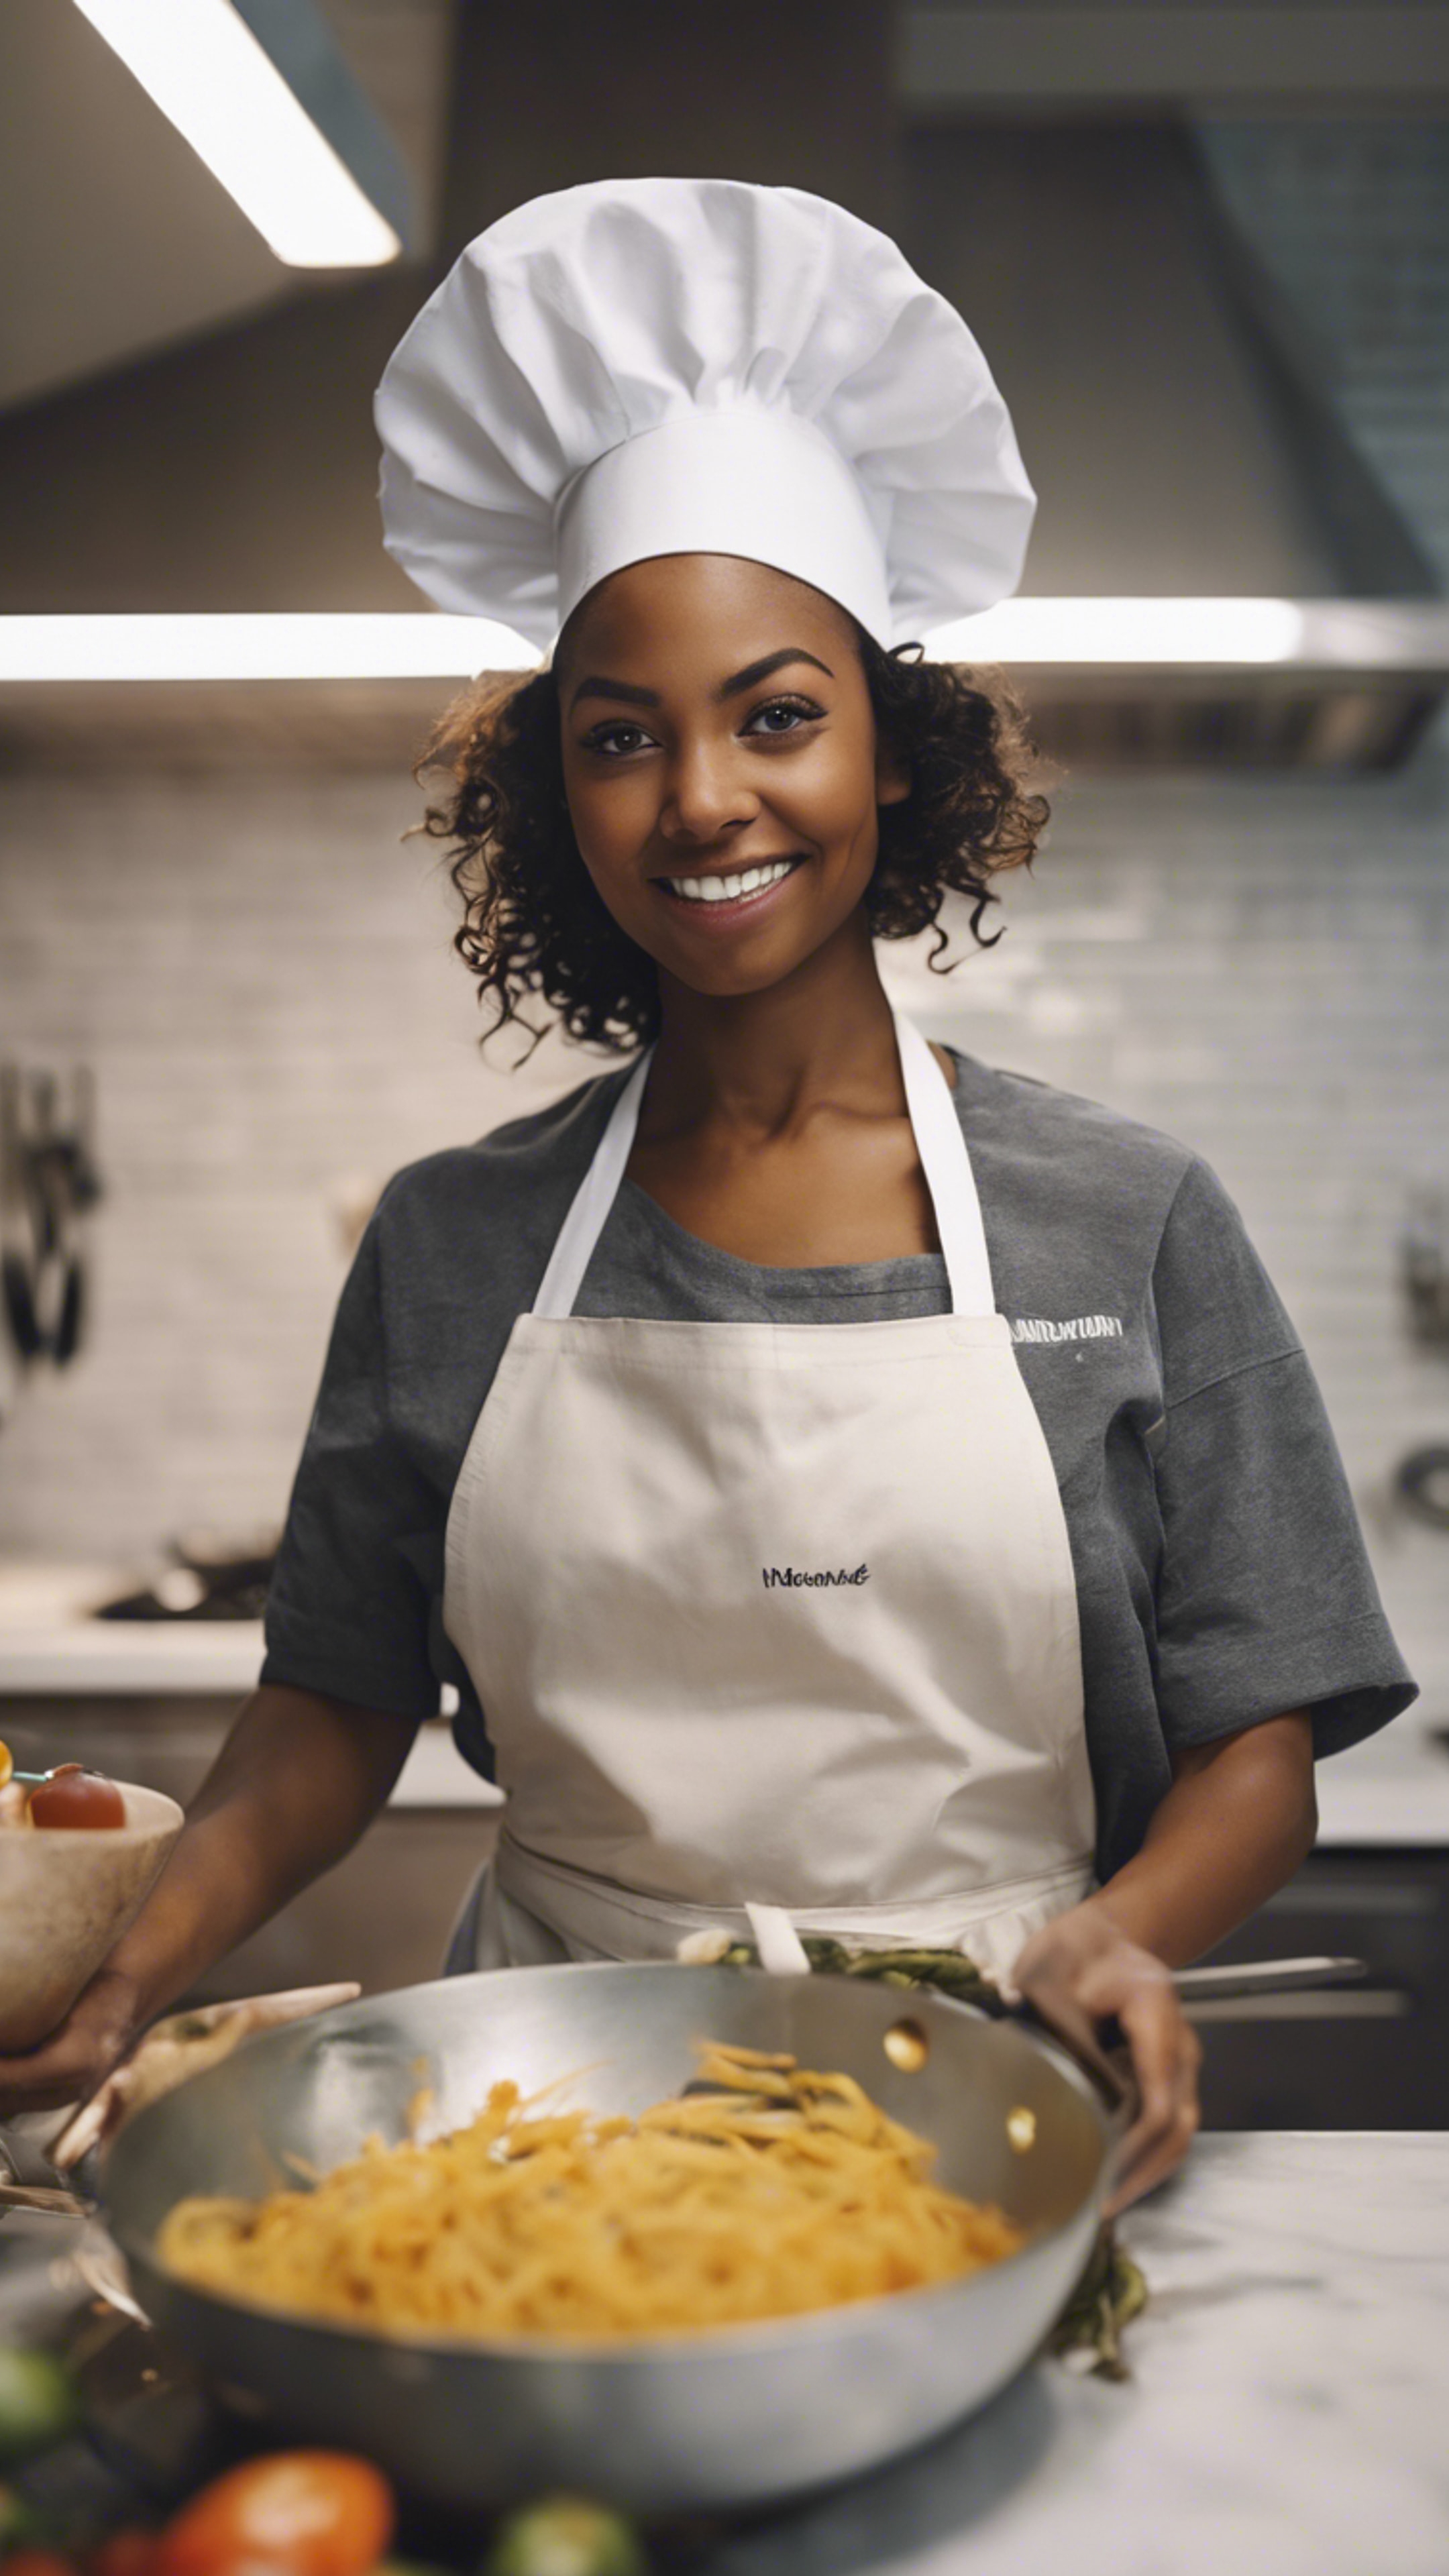 An enthusiastic black girl wearing chef’s hat and apron cooking in a modern kitchen. Tapeta[28127f79c89b4e3a826e]